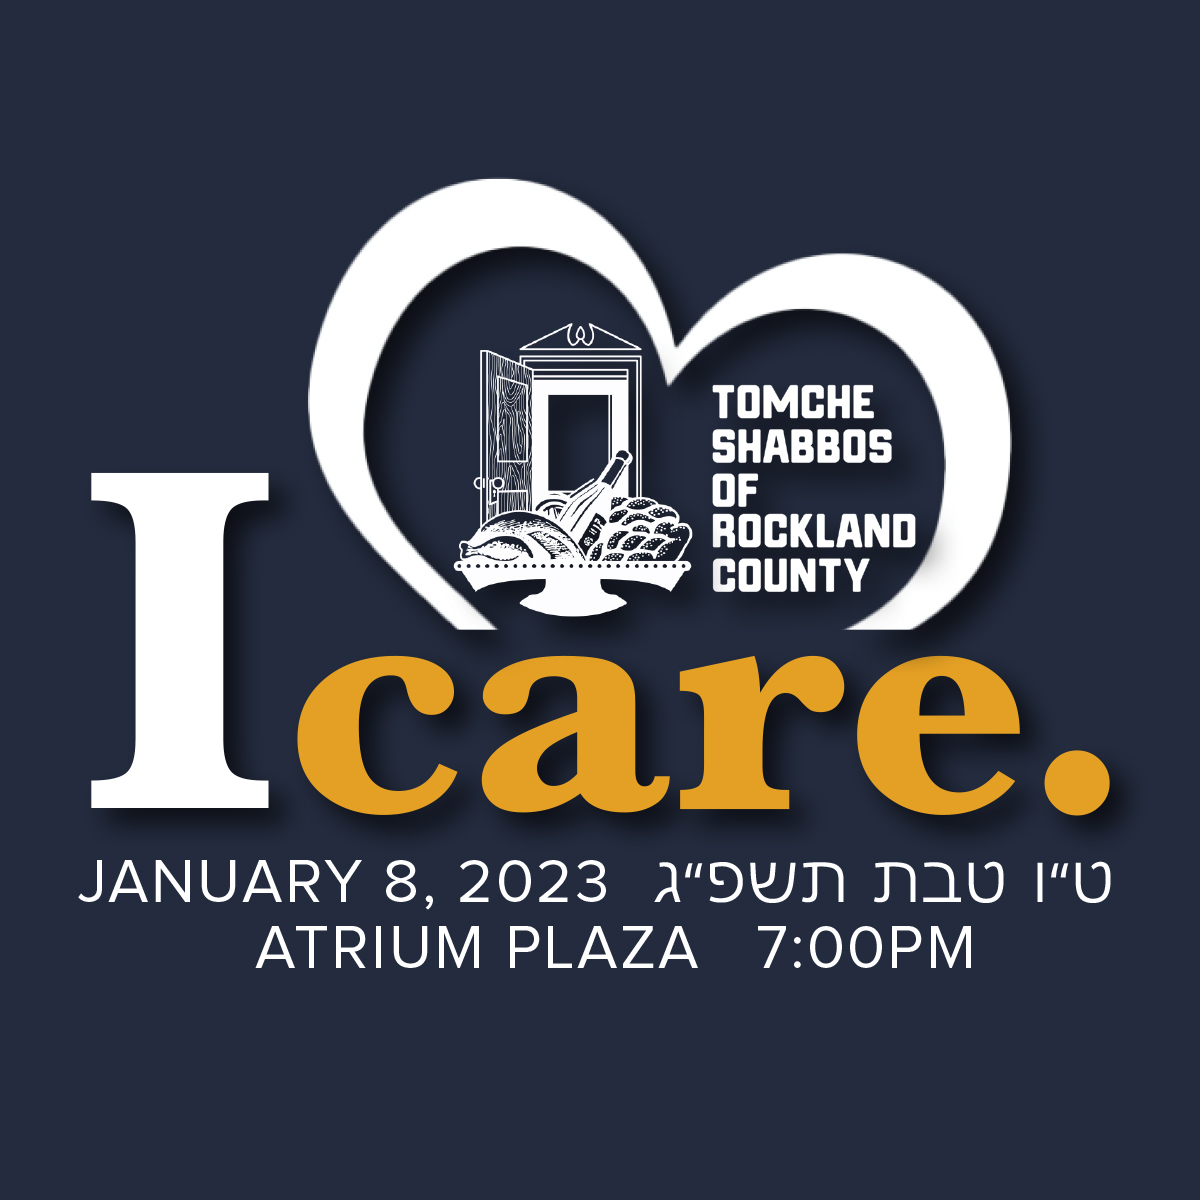 Tomche Shabbos of Rockland County  - I care.